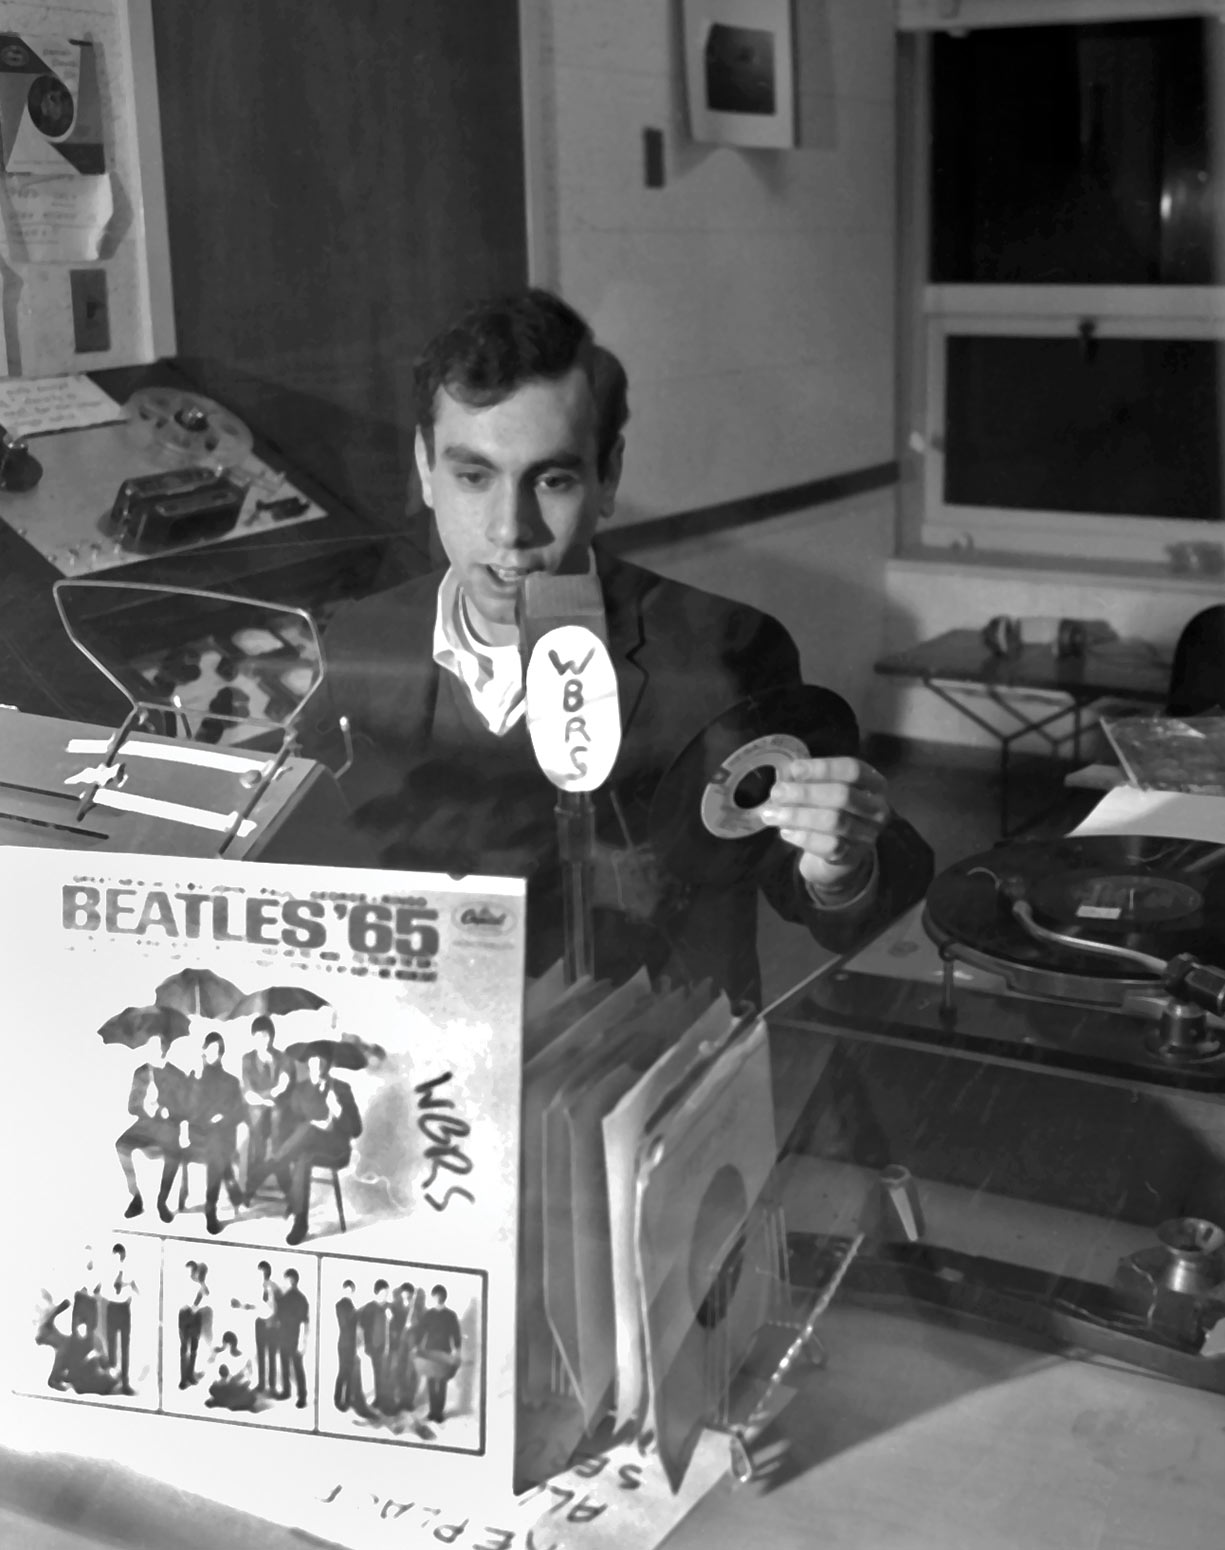 Black and white photo of a radio host, a Beatles album is seen in the foreground